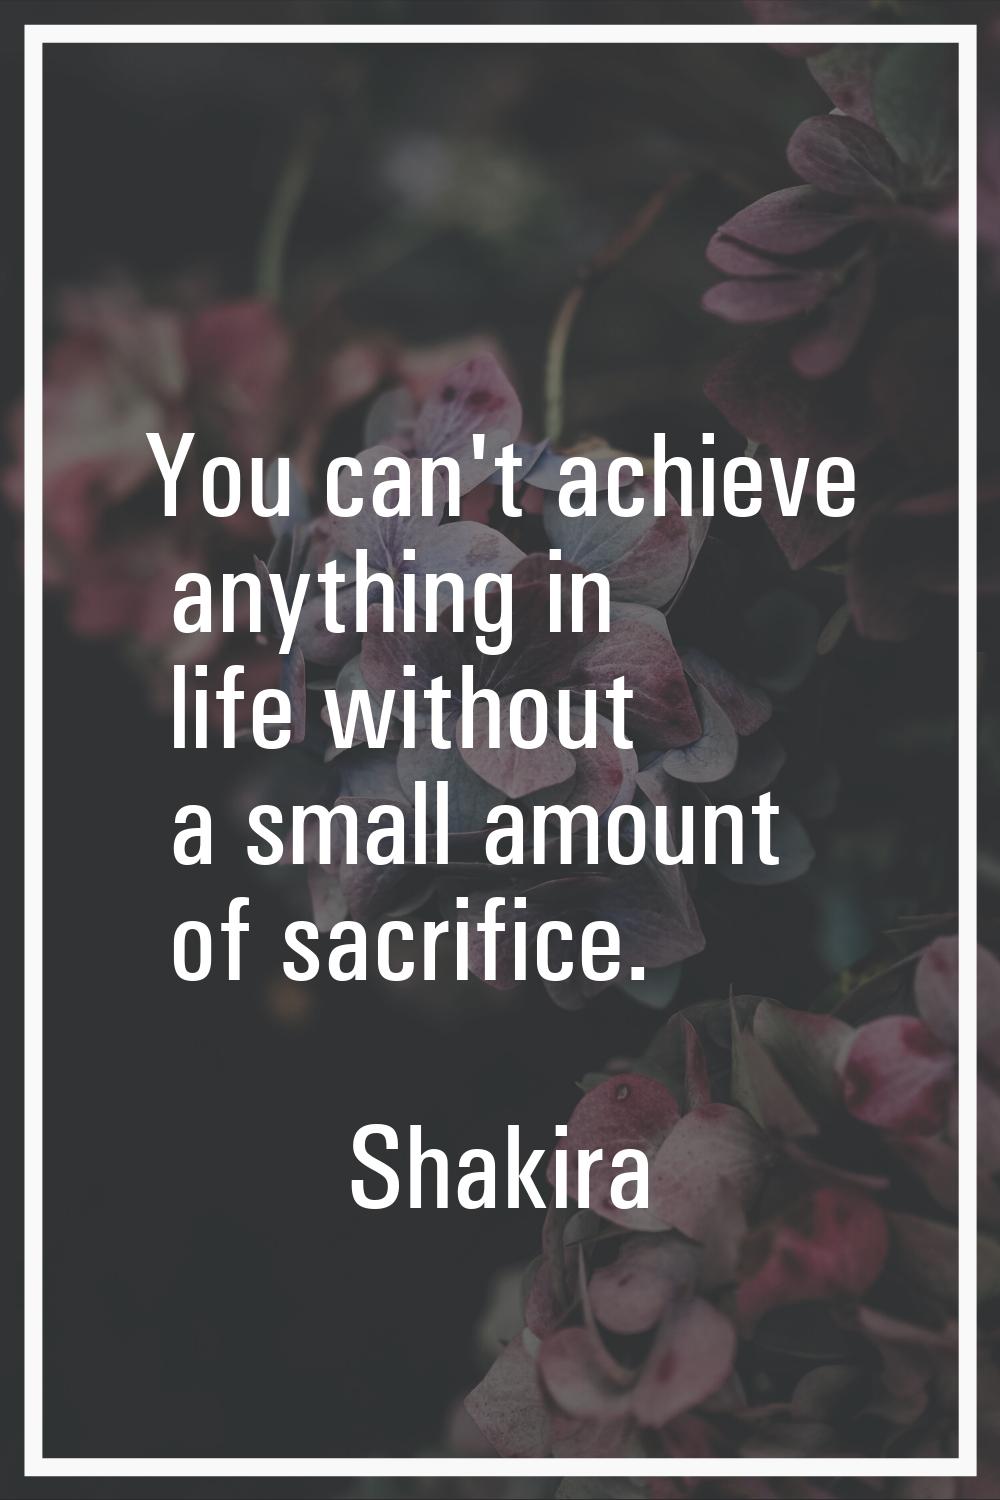 You can't achieve anything in life without a small amount of sacrifice.